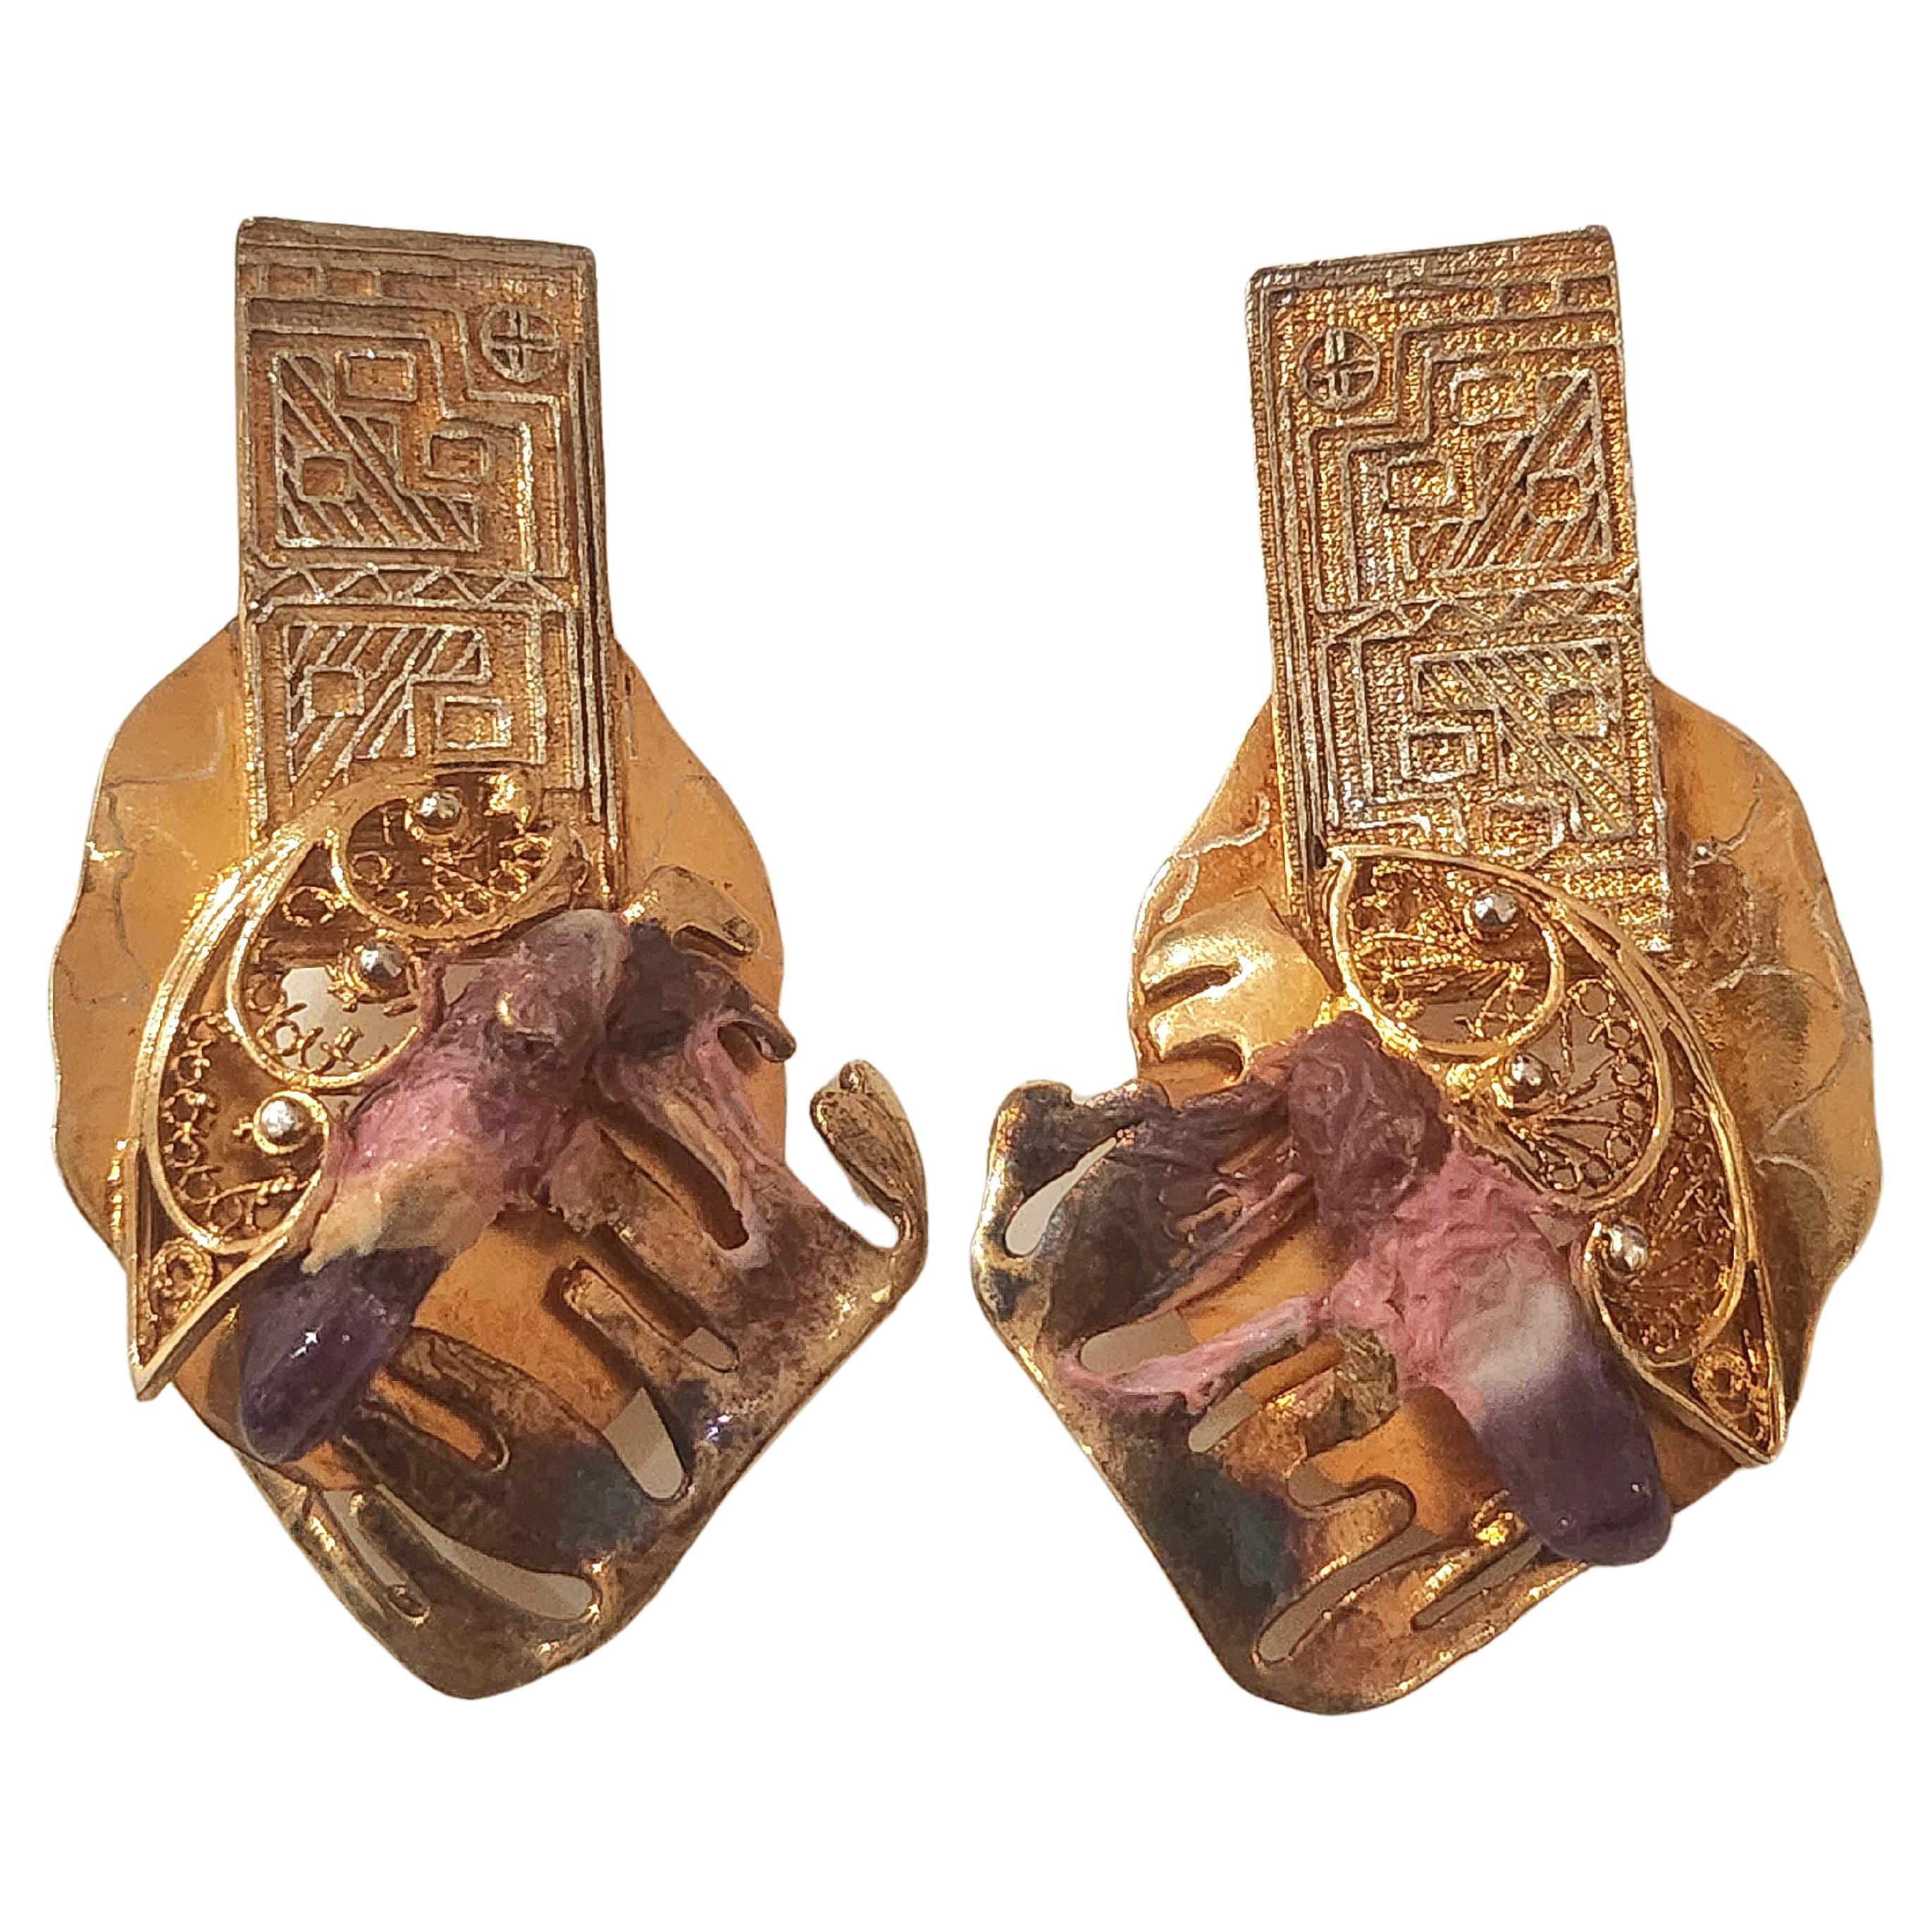 Large silver 925 hand made earrings gold plated with 750k gold finest decorted with natural gem stone in fine workmanship details total earrings weight 30 grams 